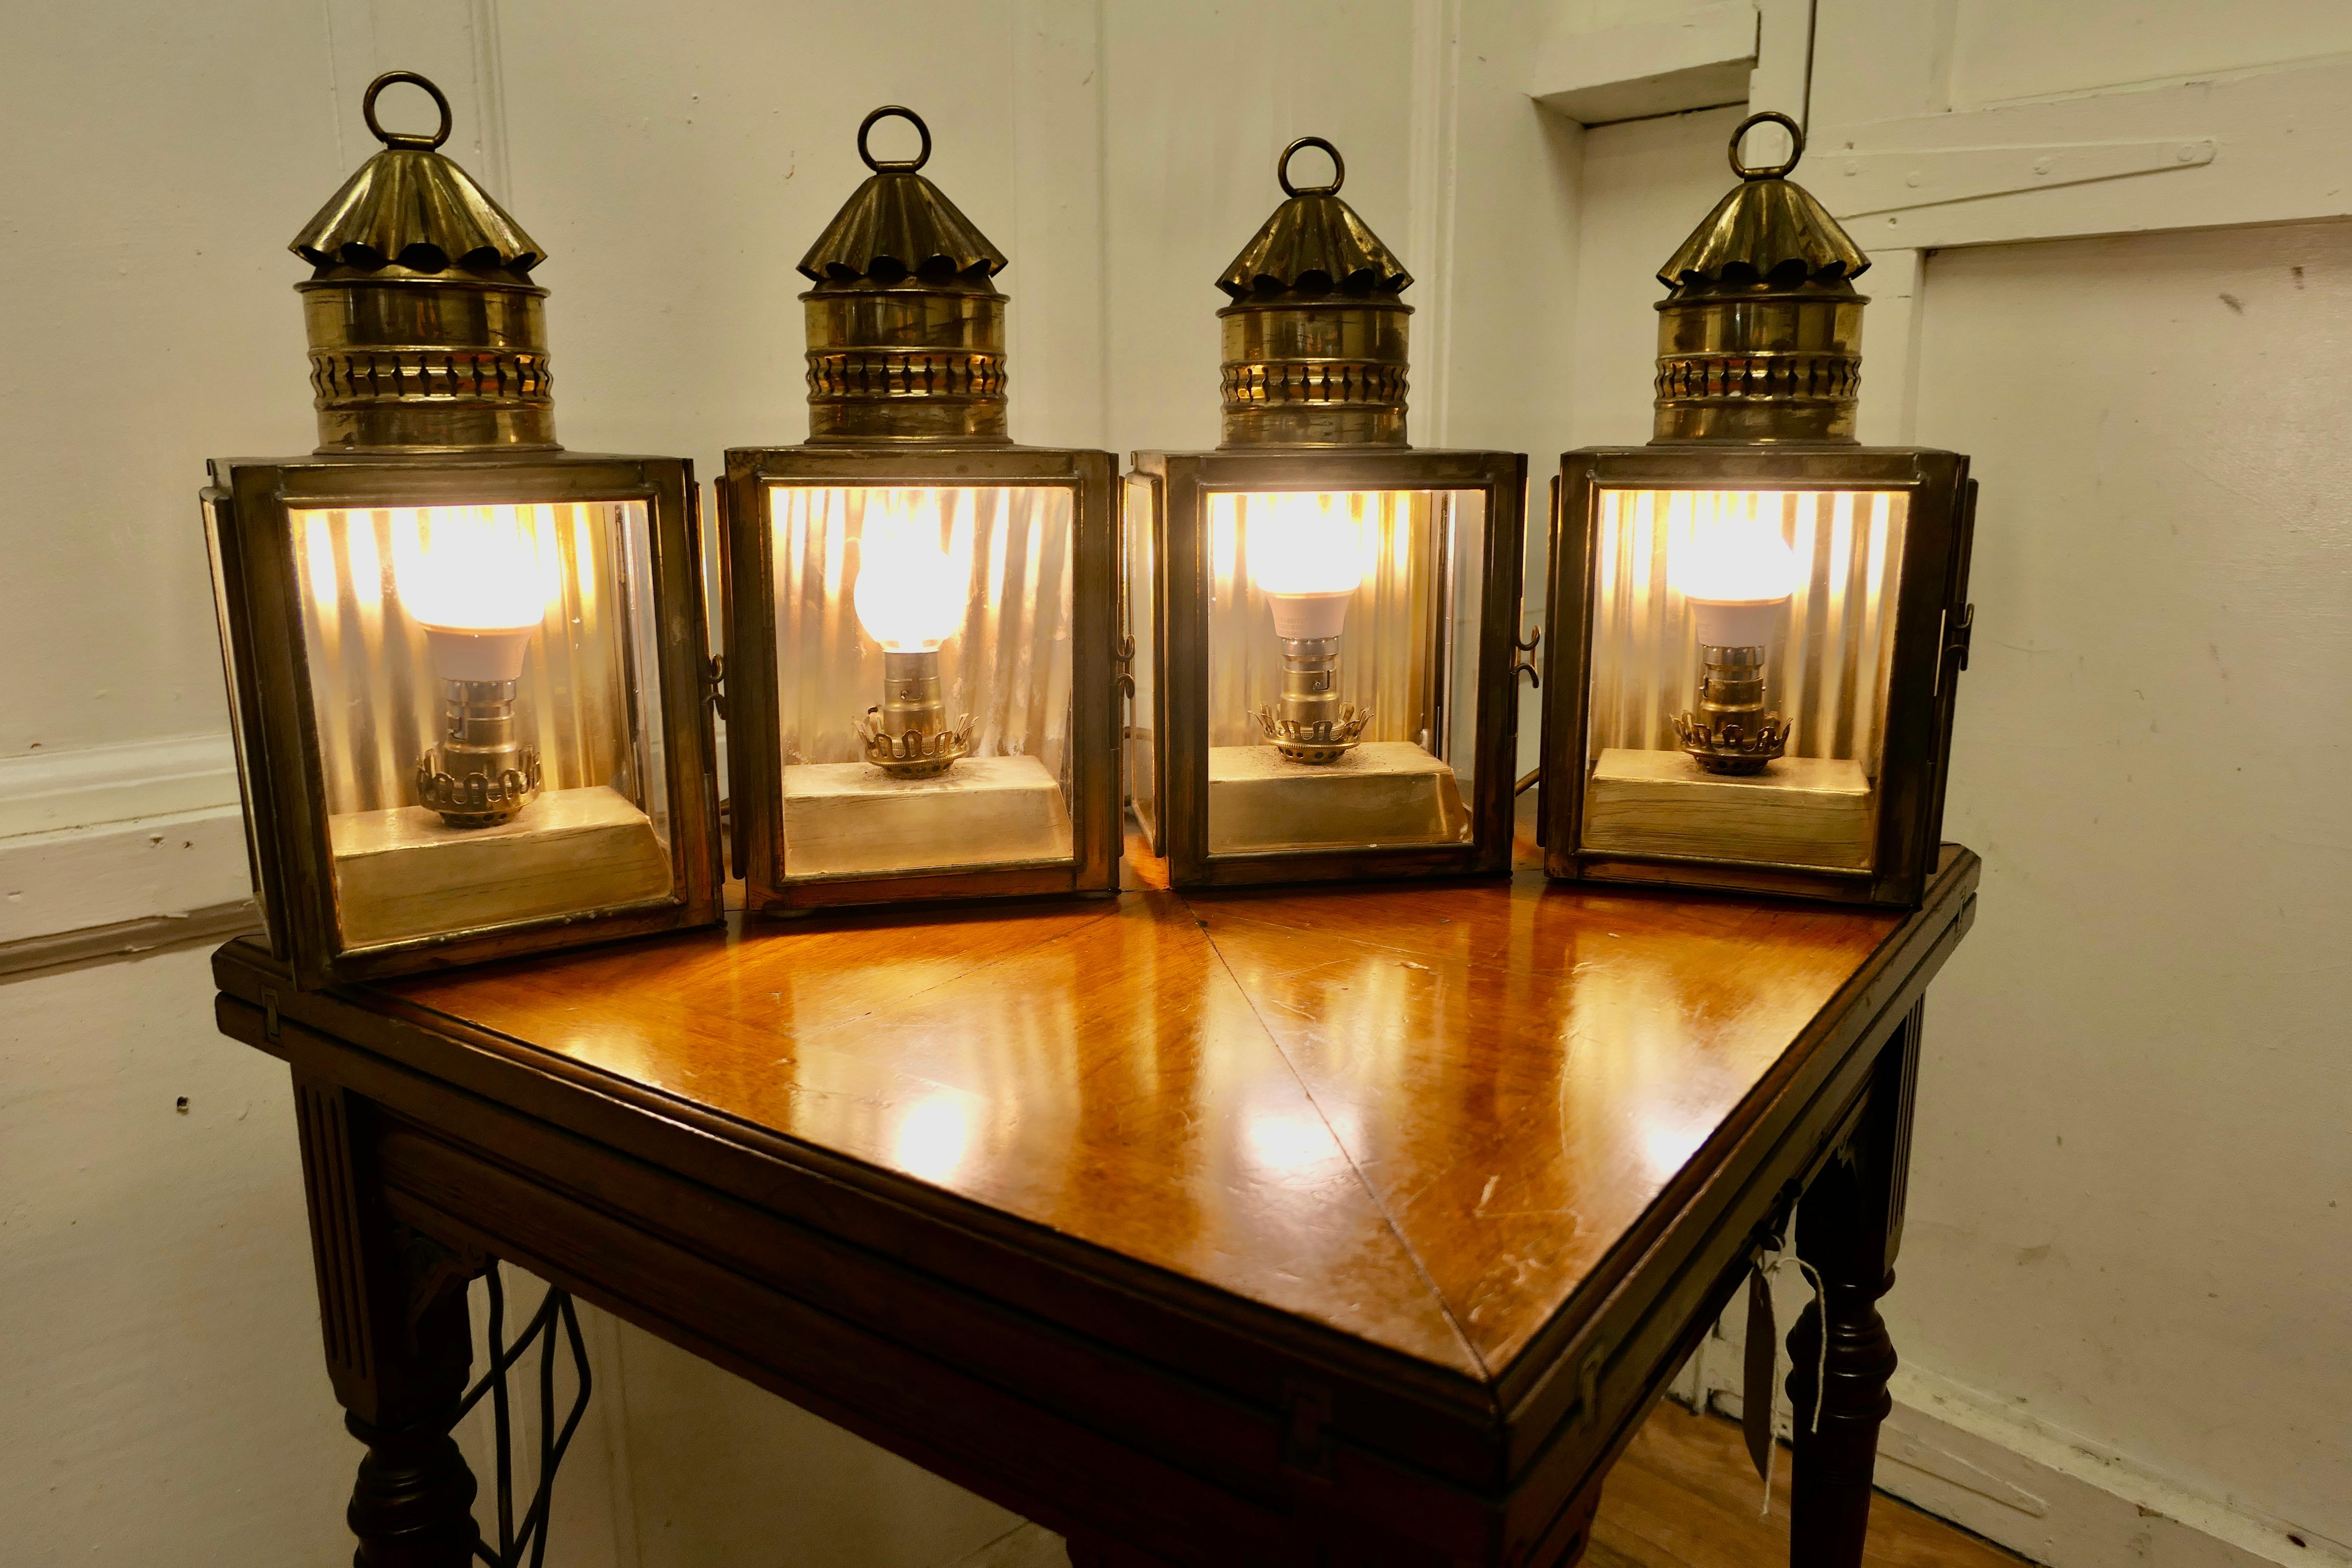 4 Electrified brass carriage lights, oil lamps.

4 Lovely pieces, dating back to the 19th century. 
Wonderfull authentic pieces, they are made in brass. 
These lights would have been used inside a carriage, originally they would have been oil